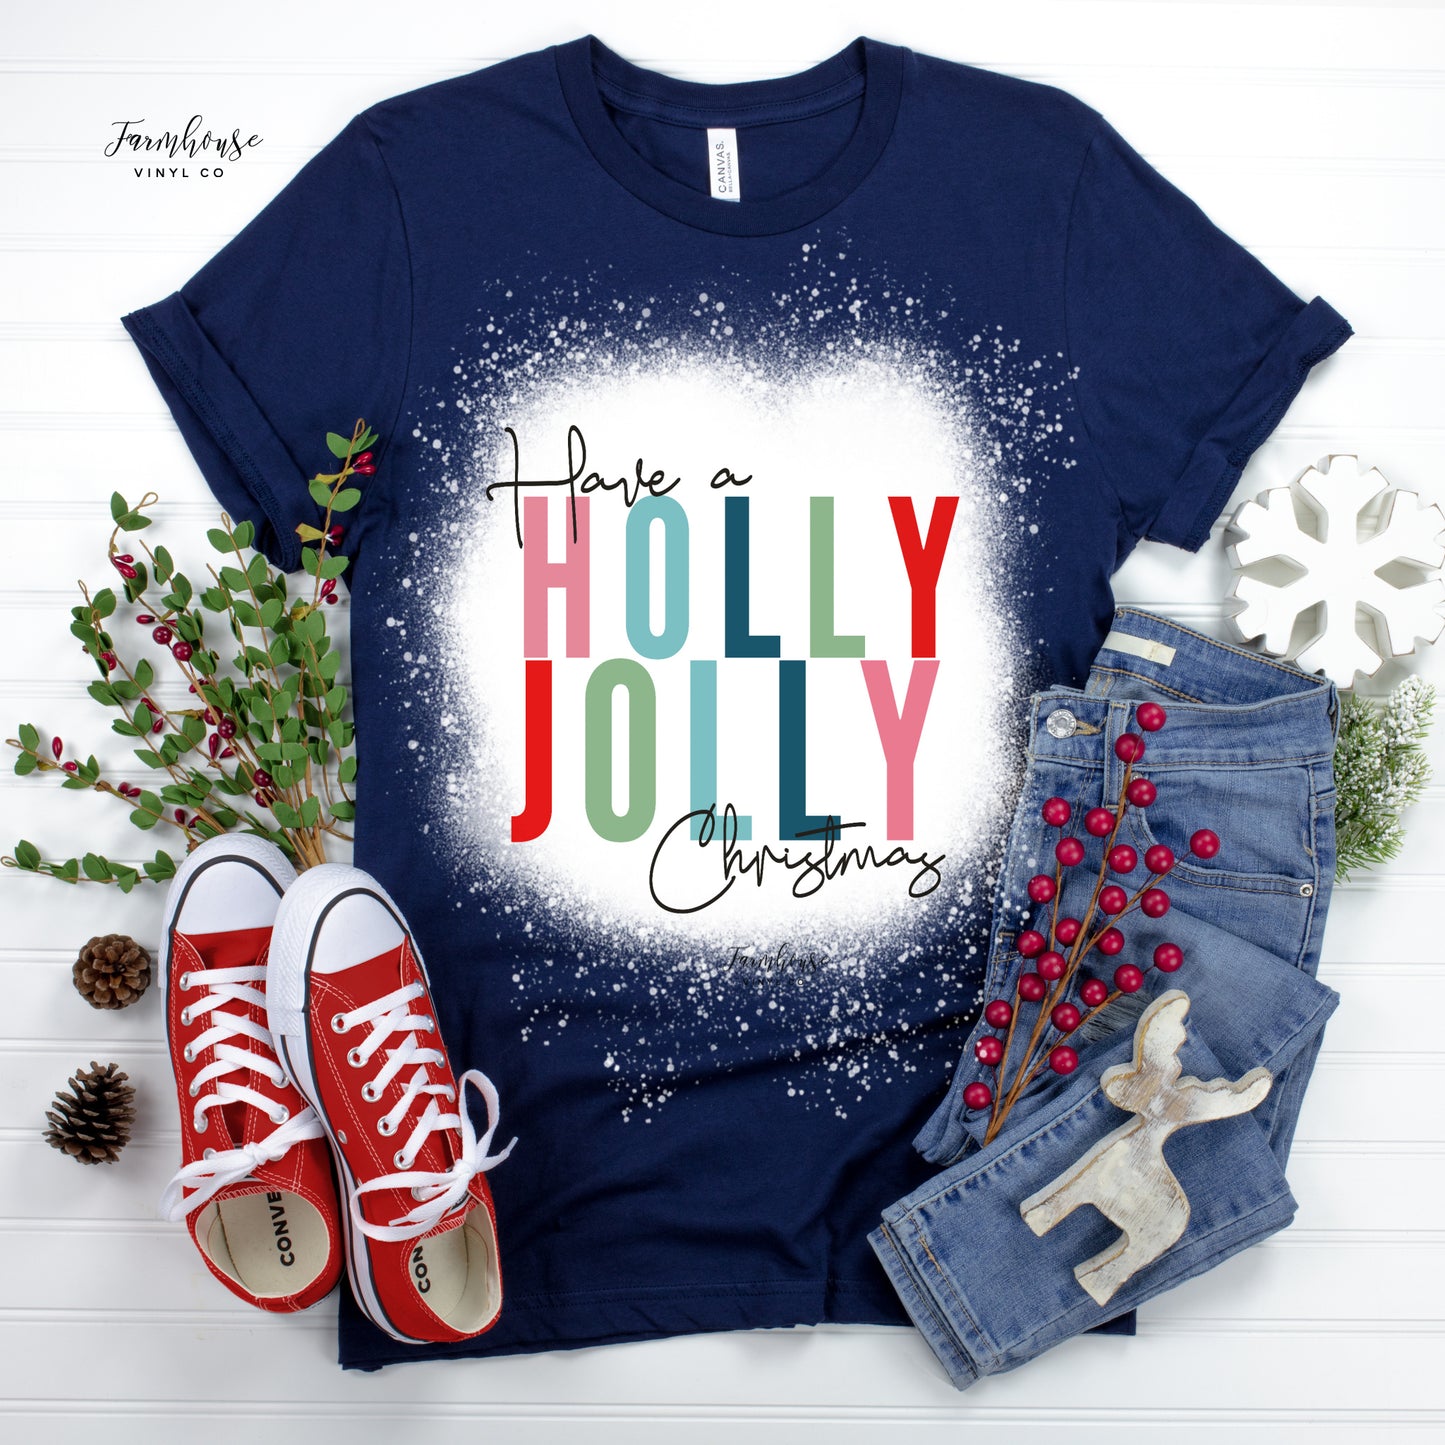 Bright Have A Holly Jolly Christmas Clothing Collection - Farmhouse Vinyl Co